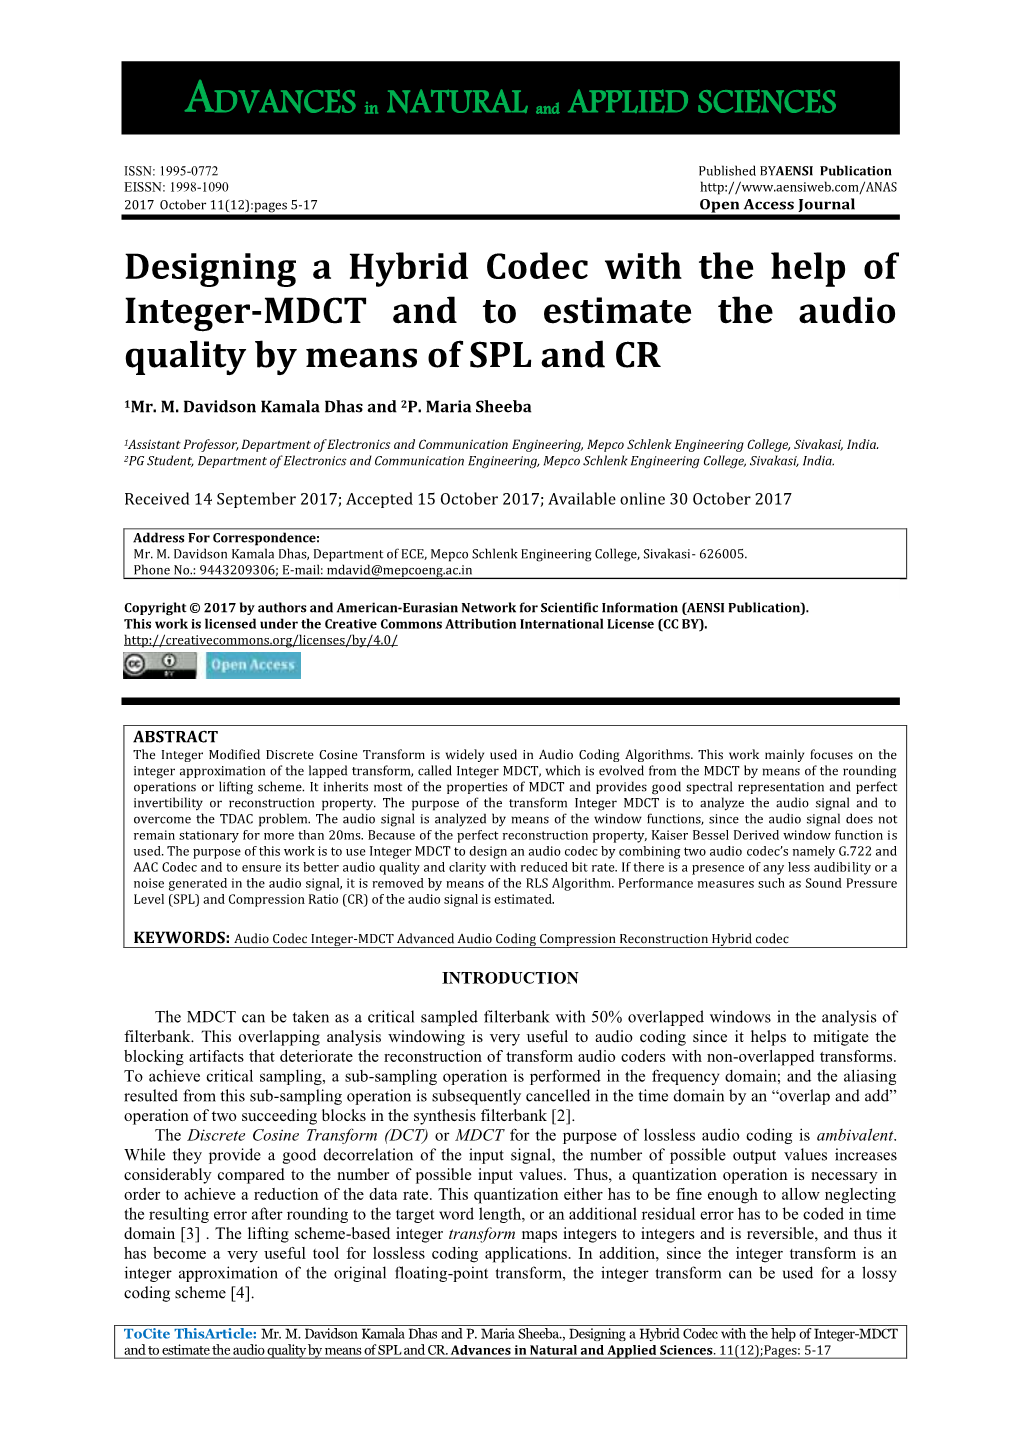 Designing a Hybrid Codec with the Help of Integer-MDCT and to Estimate the Audio Quality by Means of SPL and CR